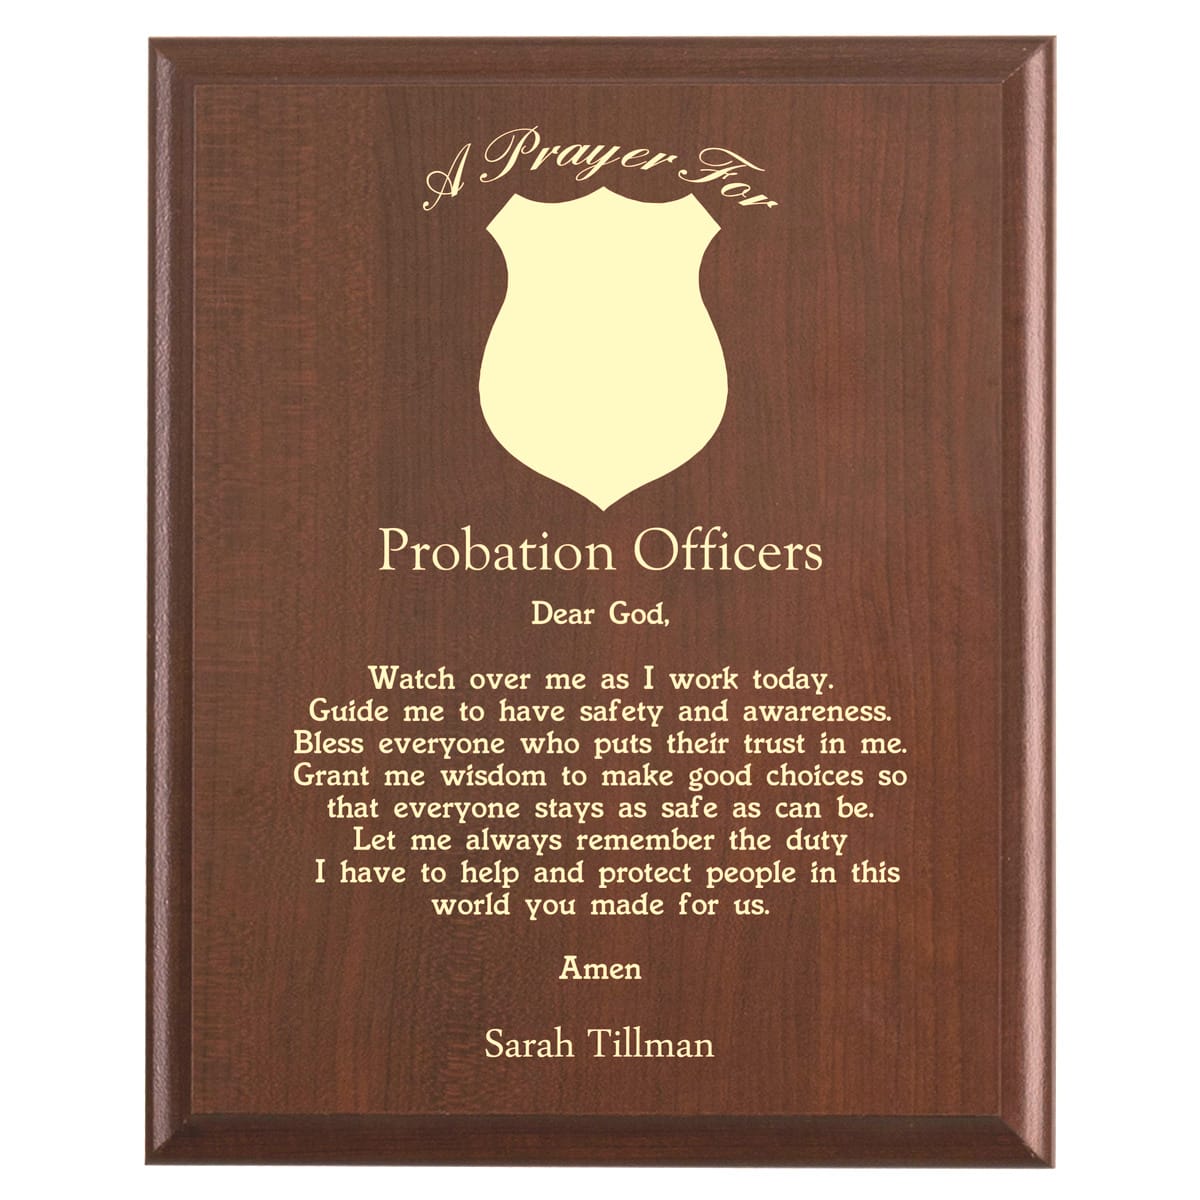 Plaque photo: Probation Officer Prayer Plaque design with free personalization. Wood style finish with customized text.